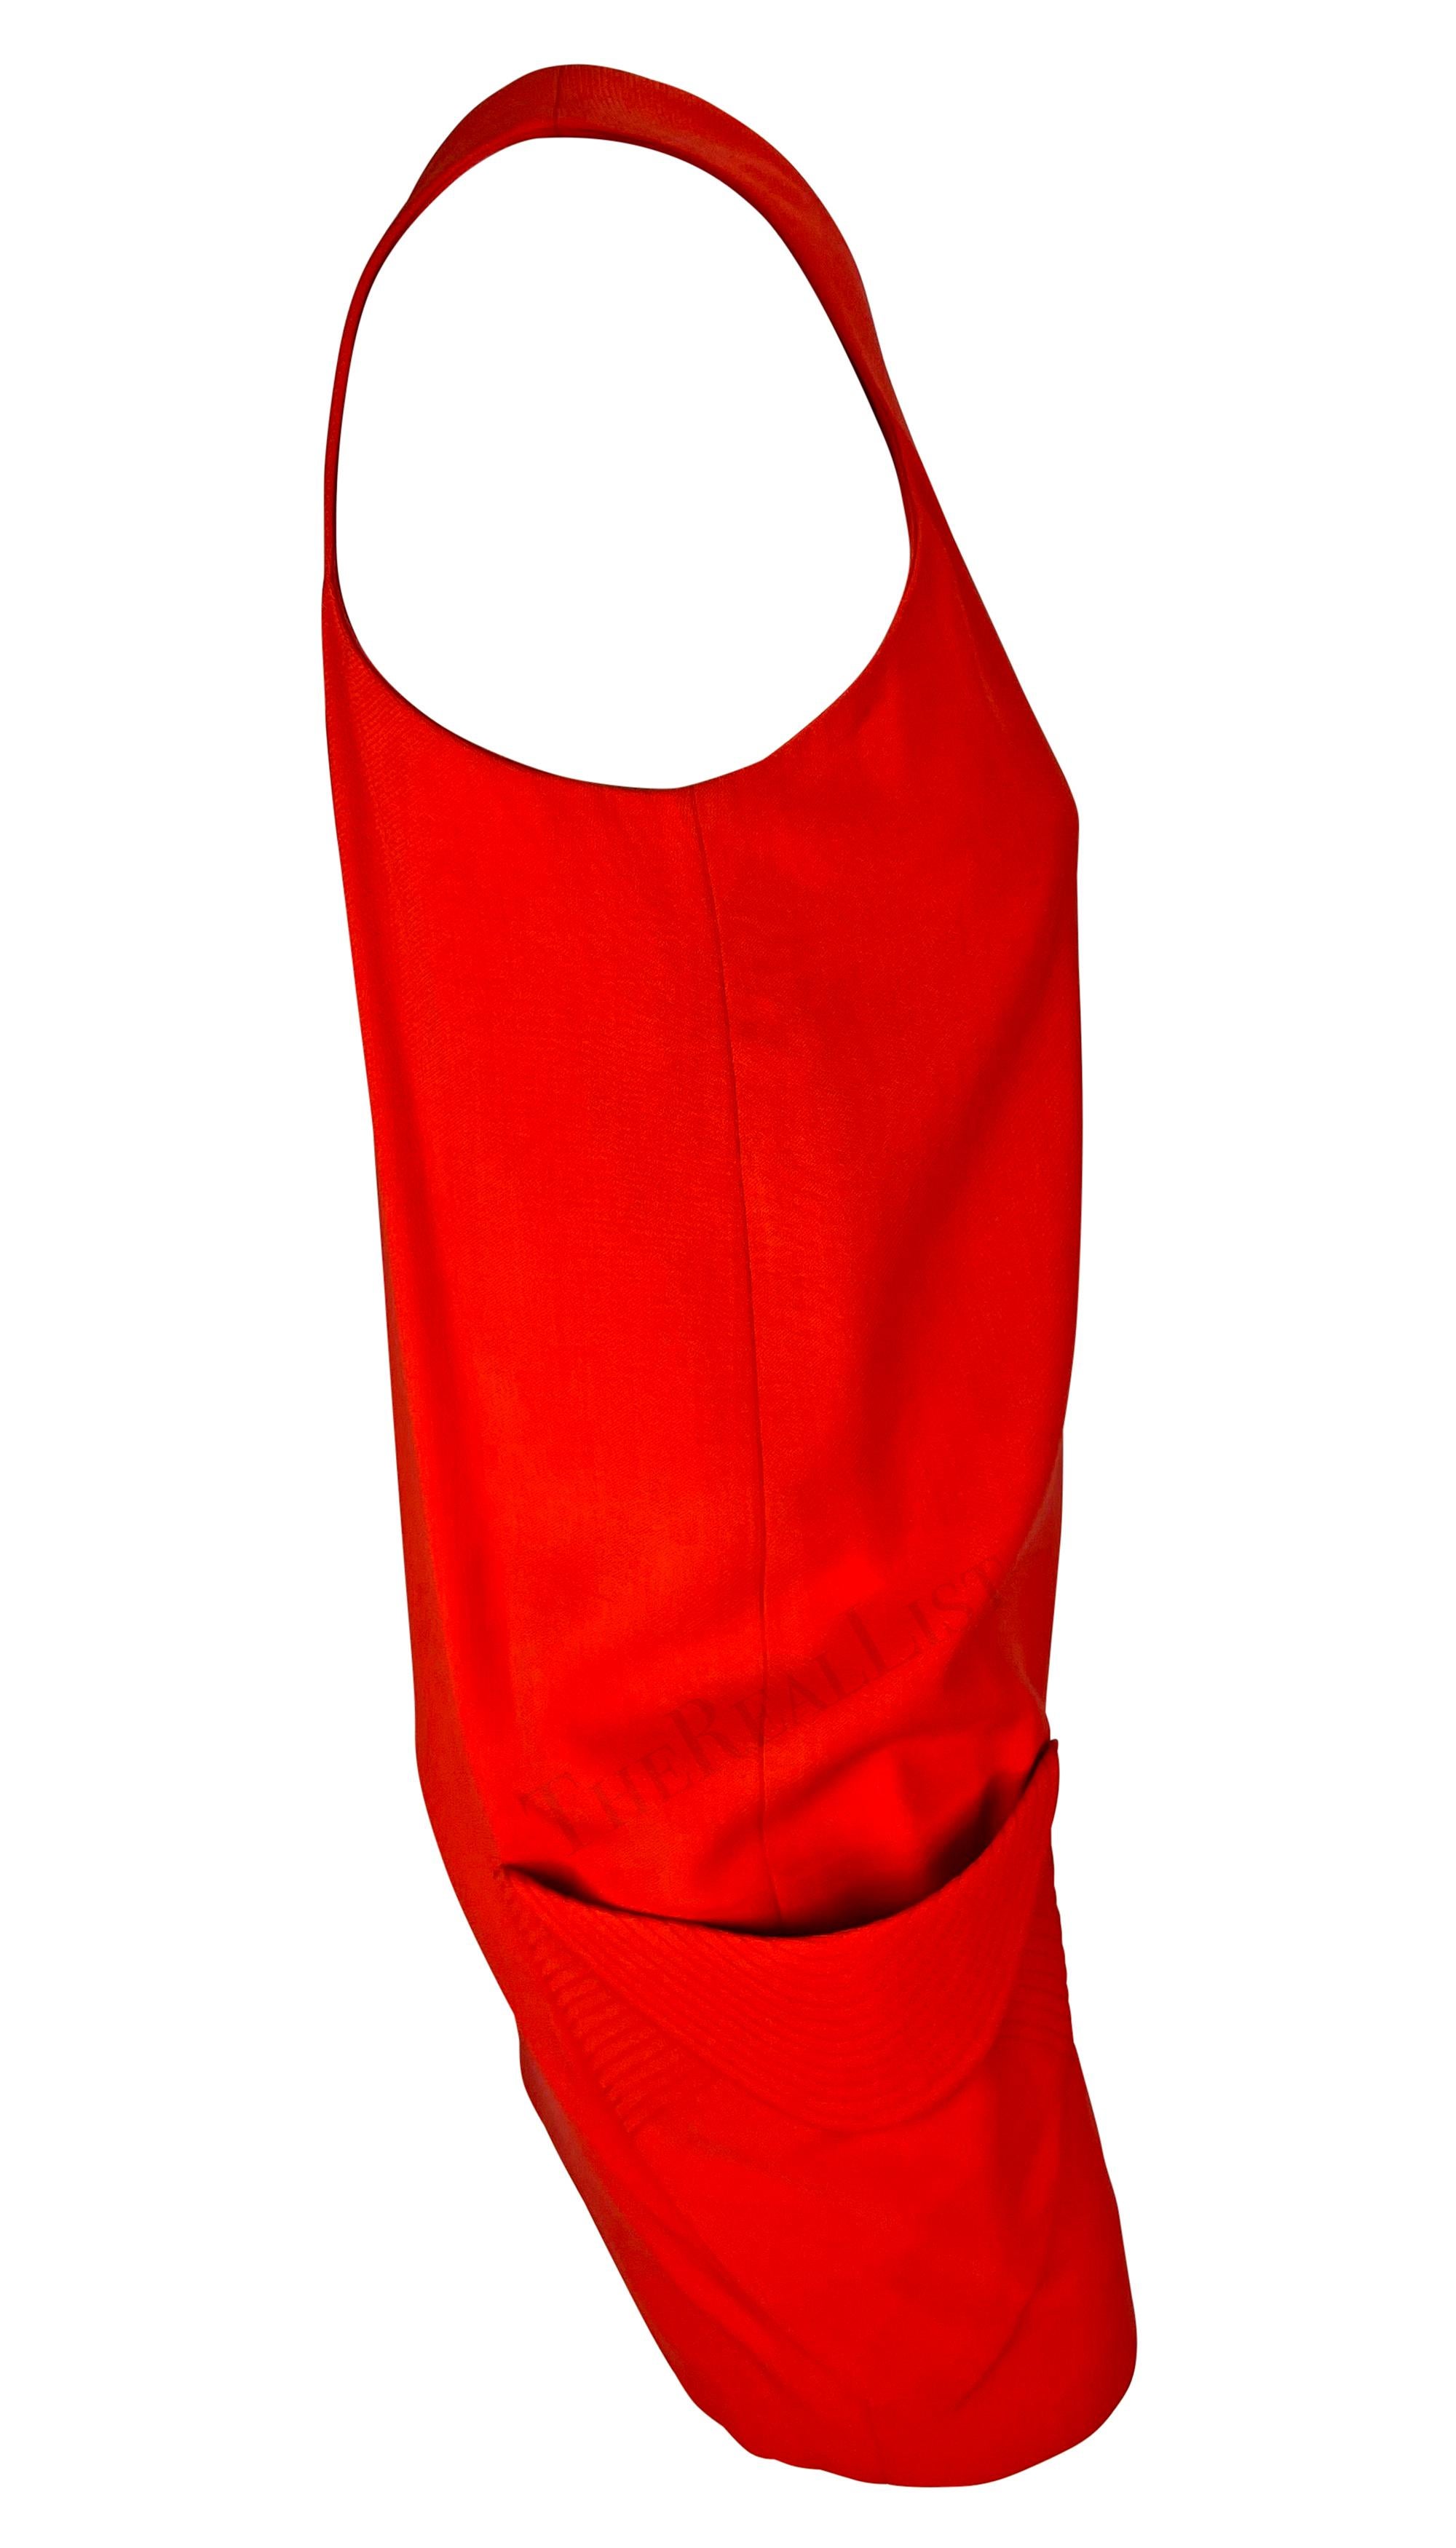 S/S 1991 Gianni Versace Runway Ad Red Sleeveless Pocket Mini Shift Dress For Sale 6